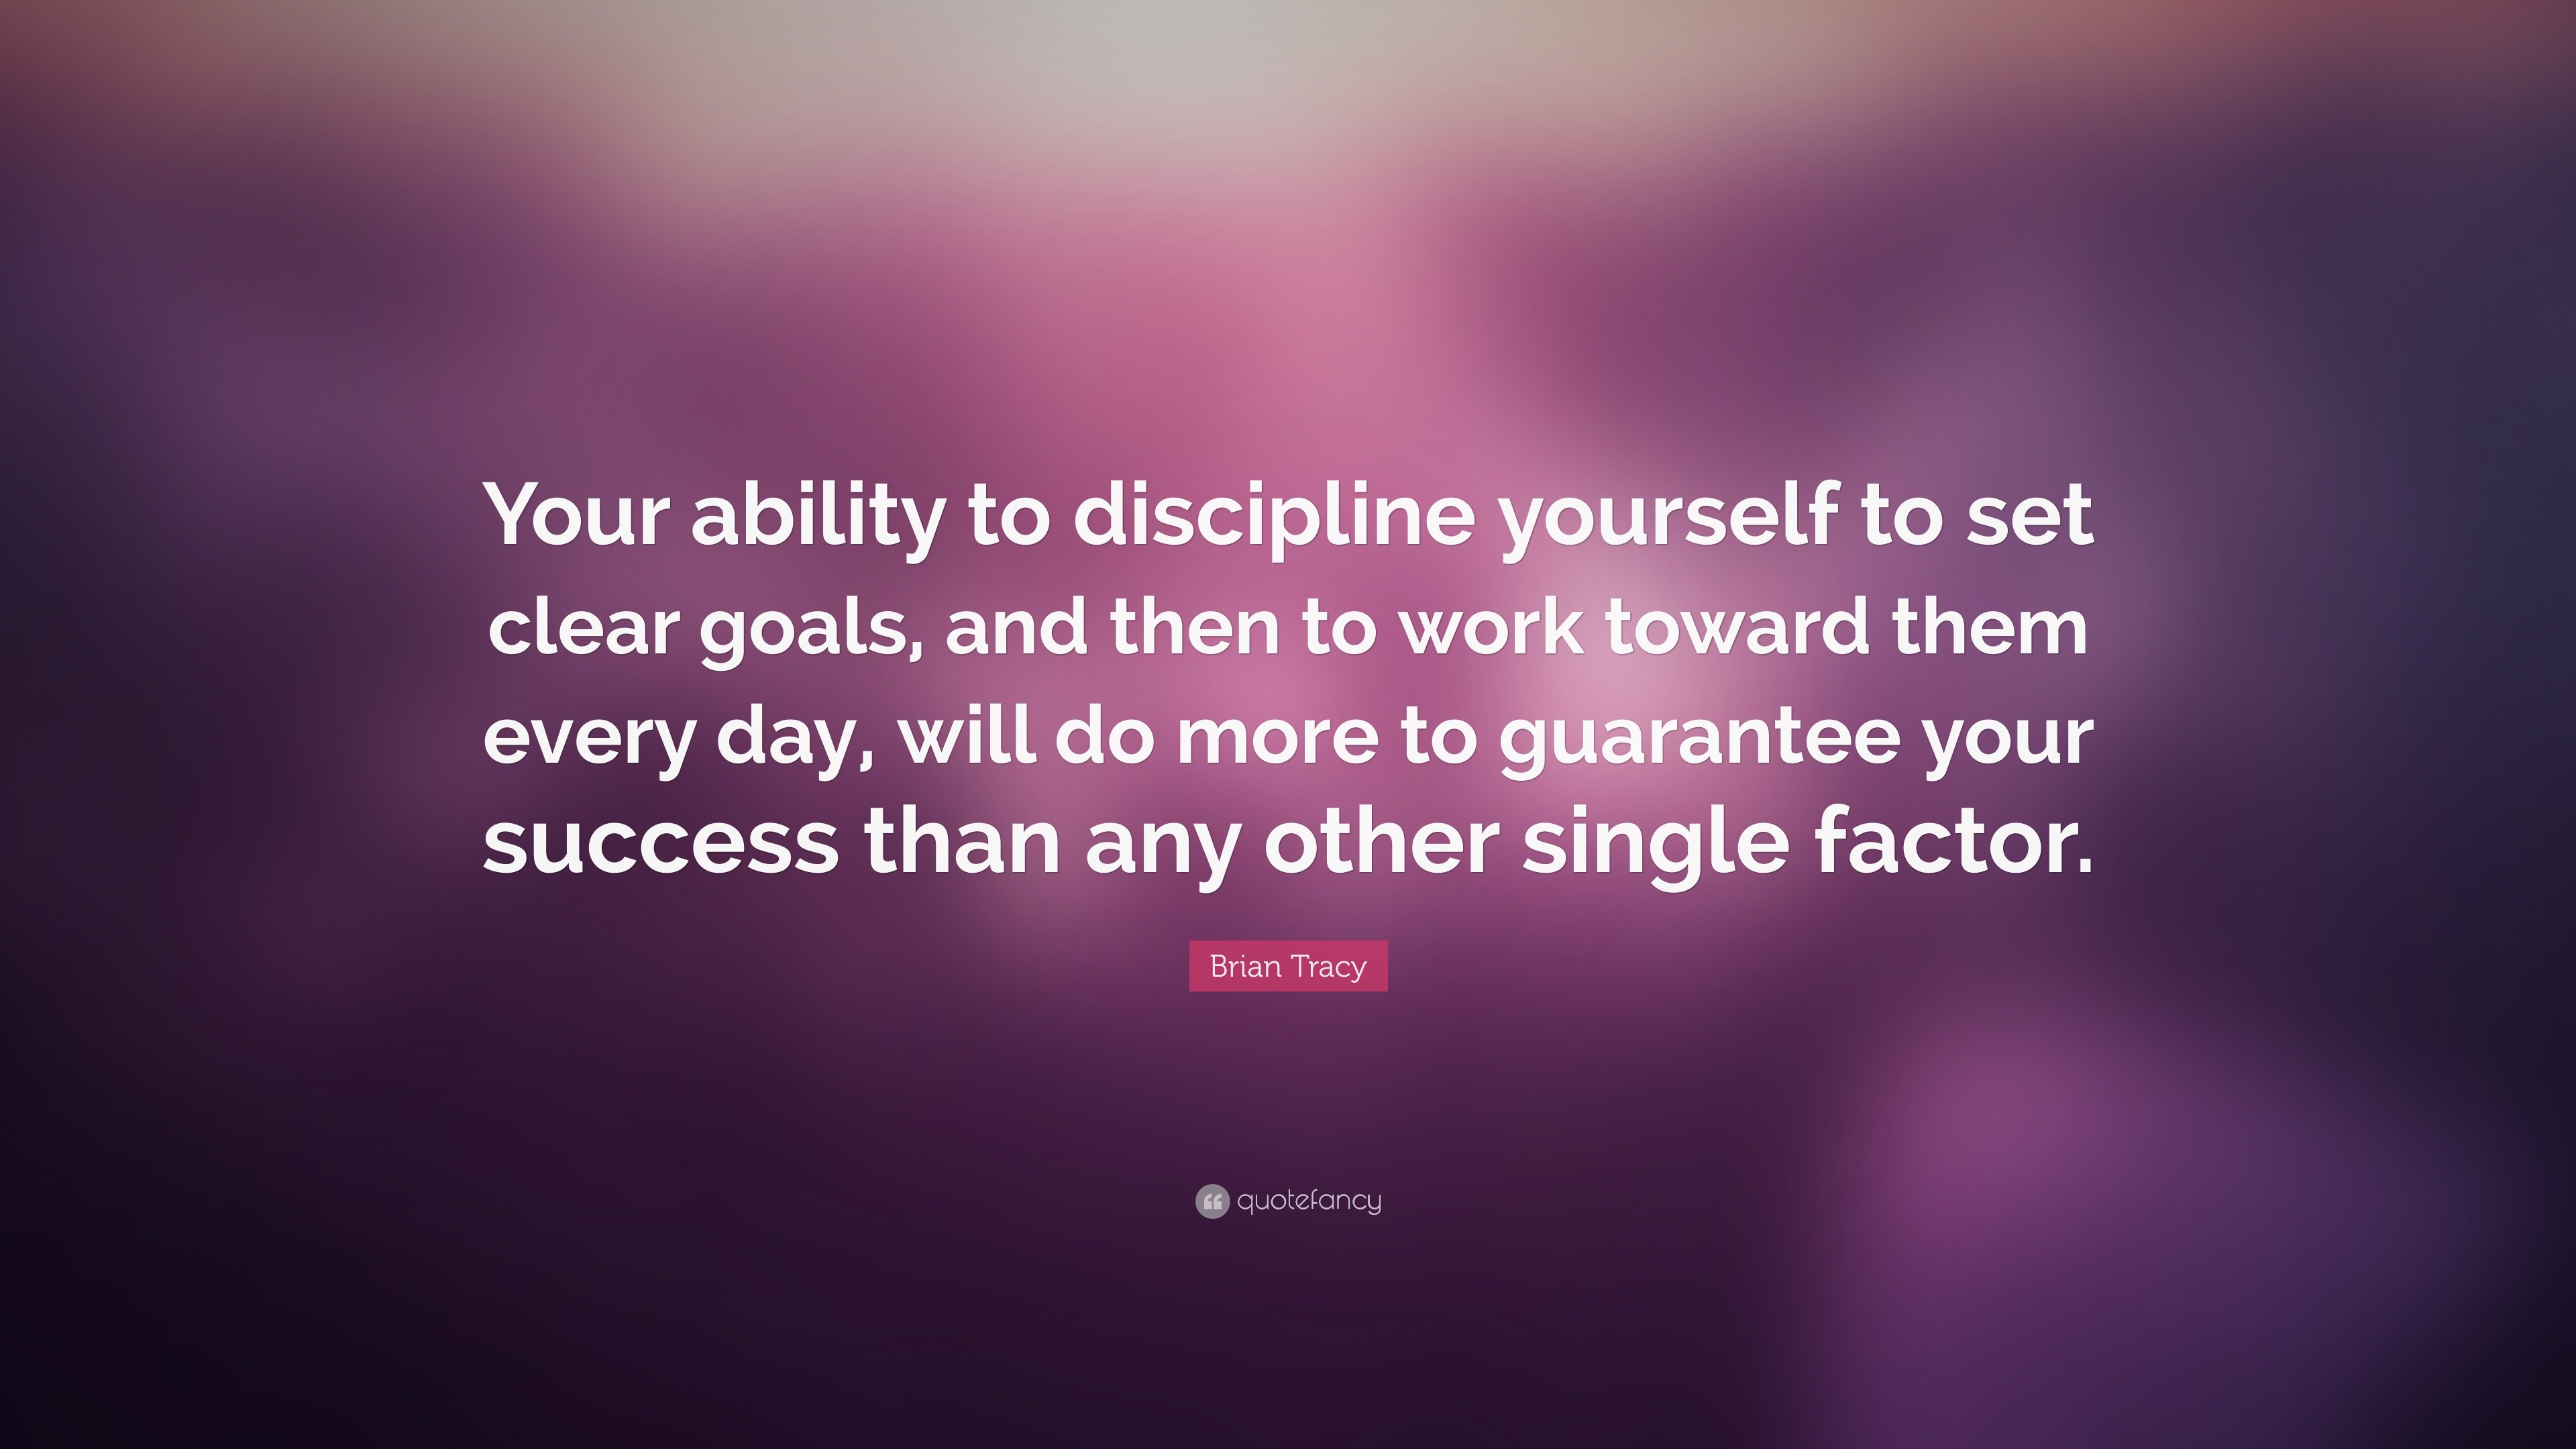 Brian Tracy Quote: “Your ability to discipline yourself to set clear ...